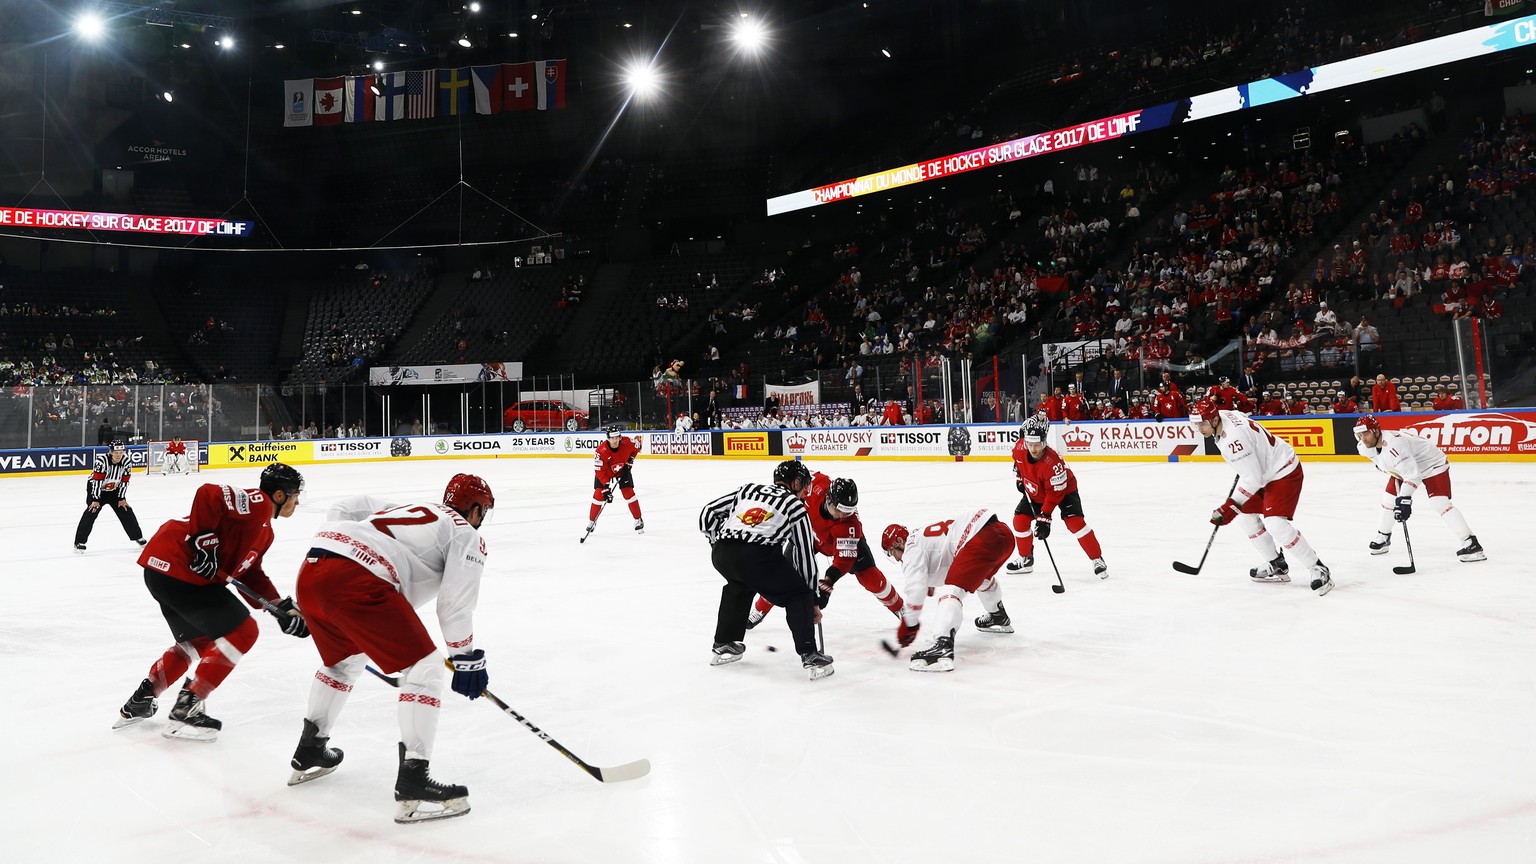 epa05955104 Players in a face-off during IIHF Ice Hockey World Championship 2017 group B preliminary round game between Switzerland and Belarus, in Paris, France, 10 May 2017. EPA/ETIENNE LAURENT